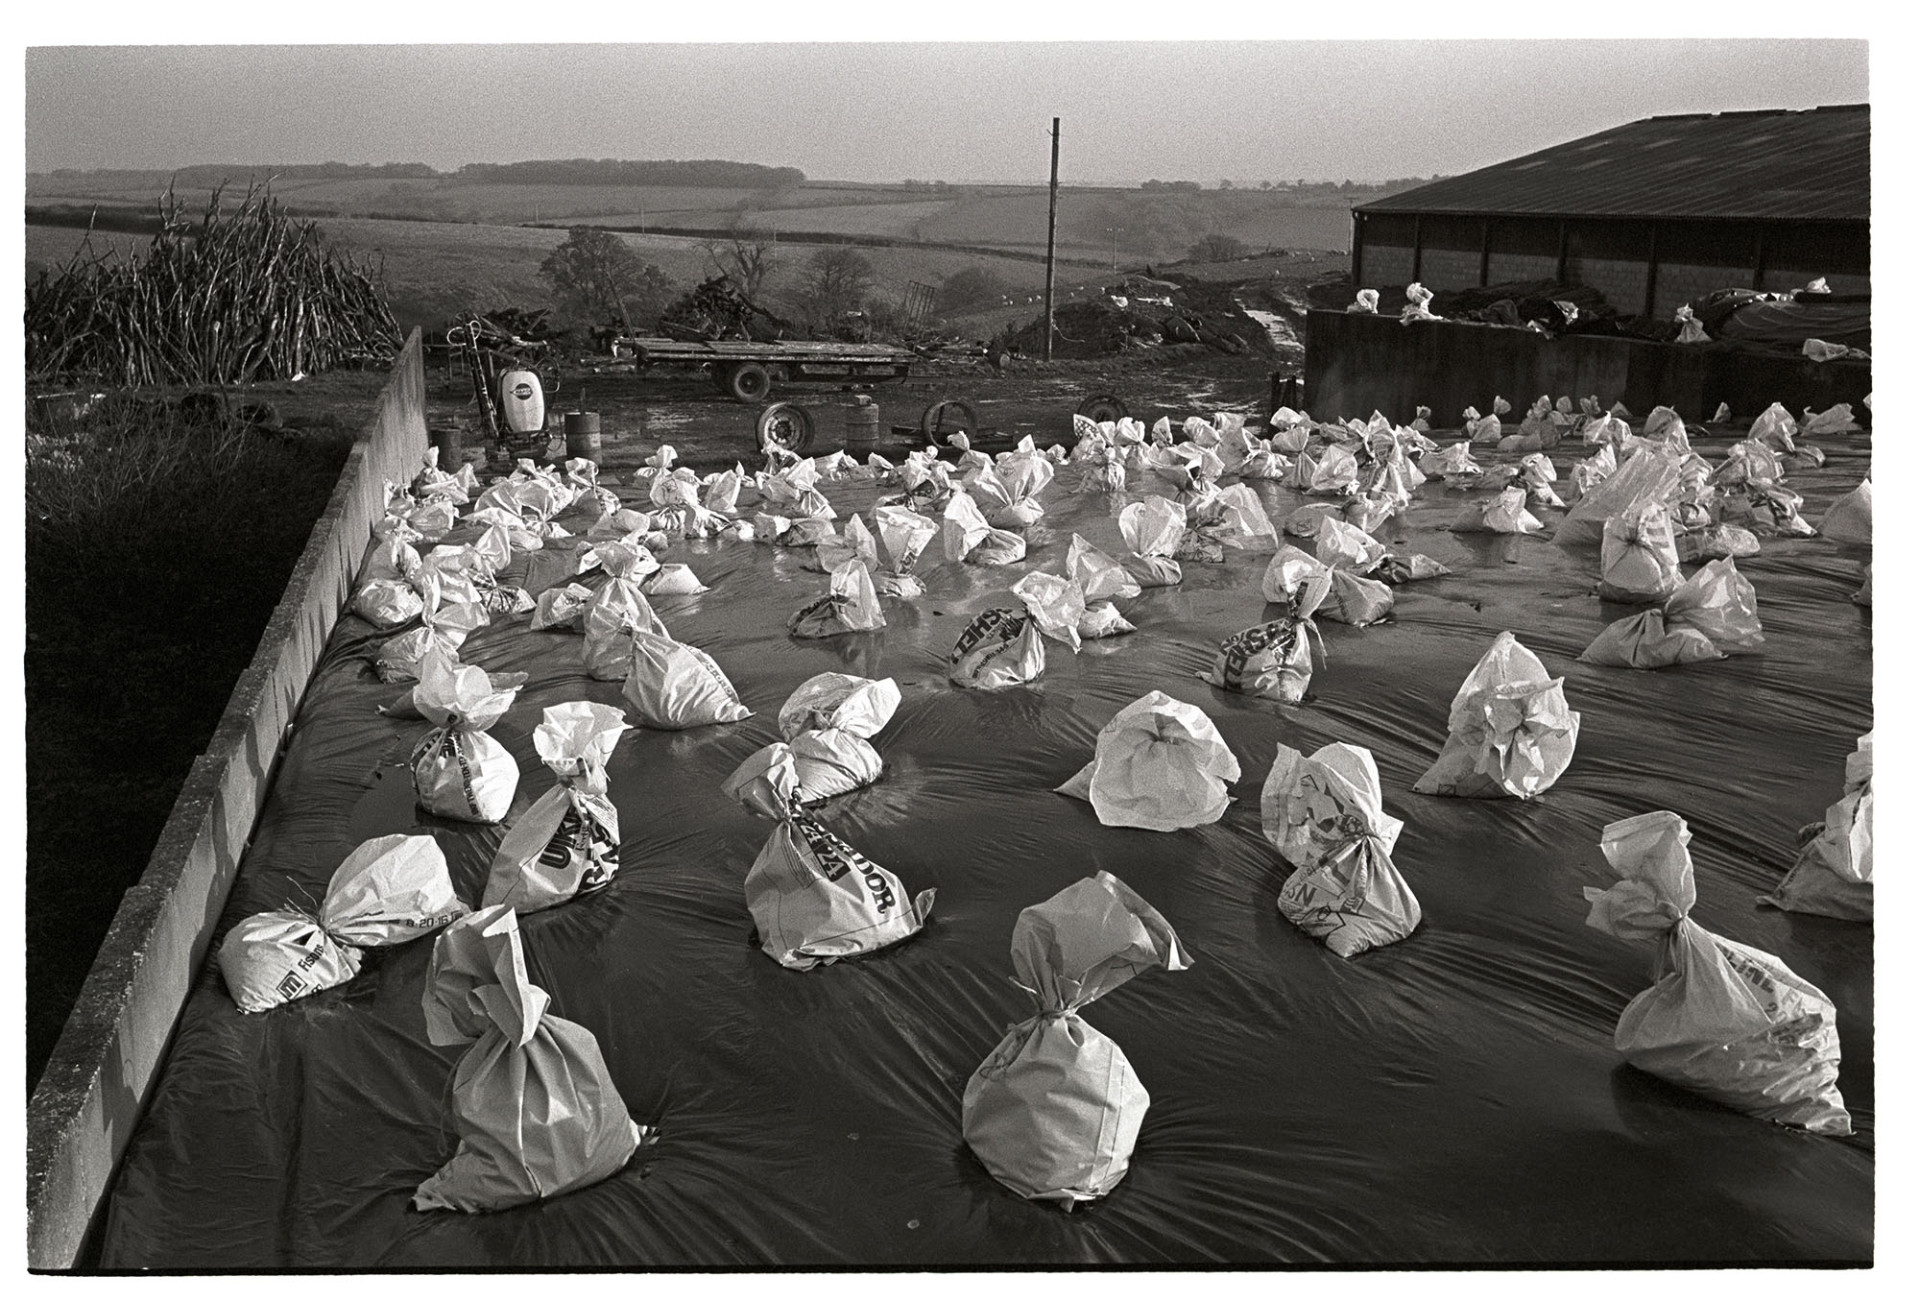 Polythene covered silage with white plastic bags as weights. 
[Silage covered in polythene at Parsonage Farm, Chulmleigh. It is being weighed down by white plastic bags, possibly filled with sand. Other farm buildings, a trailer and woodpile can be seen in the background with fields in the distance.]